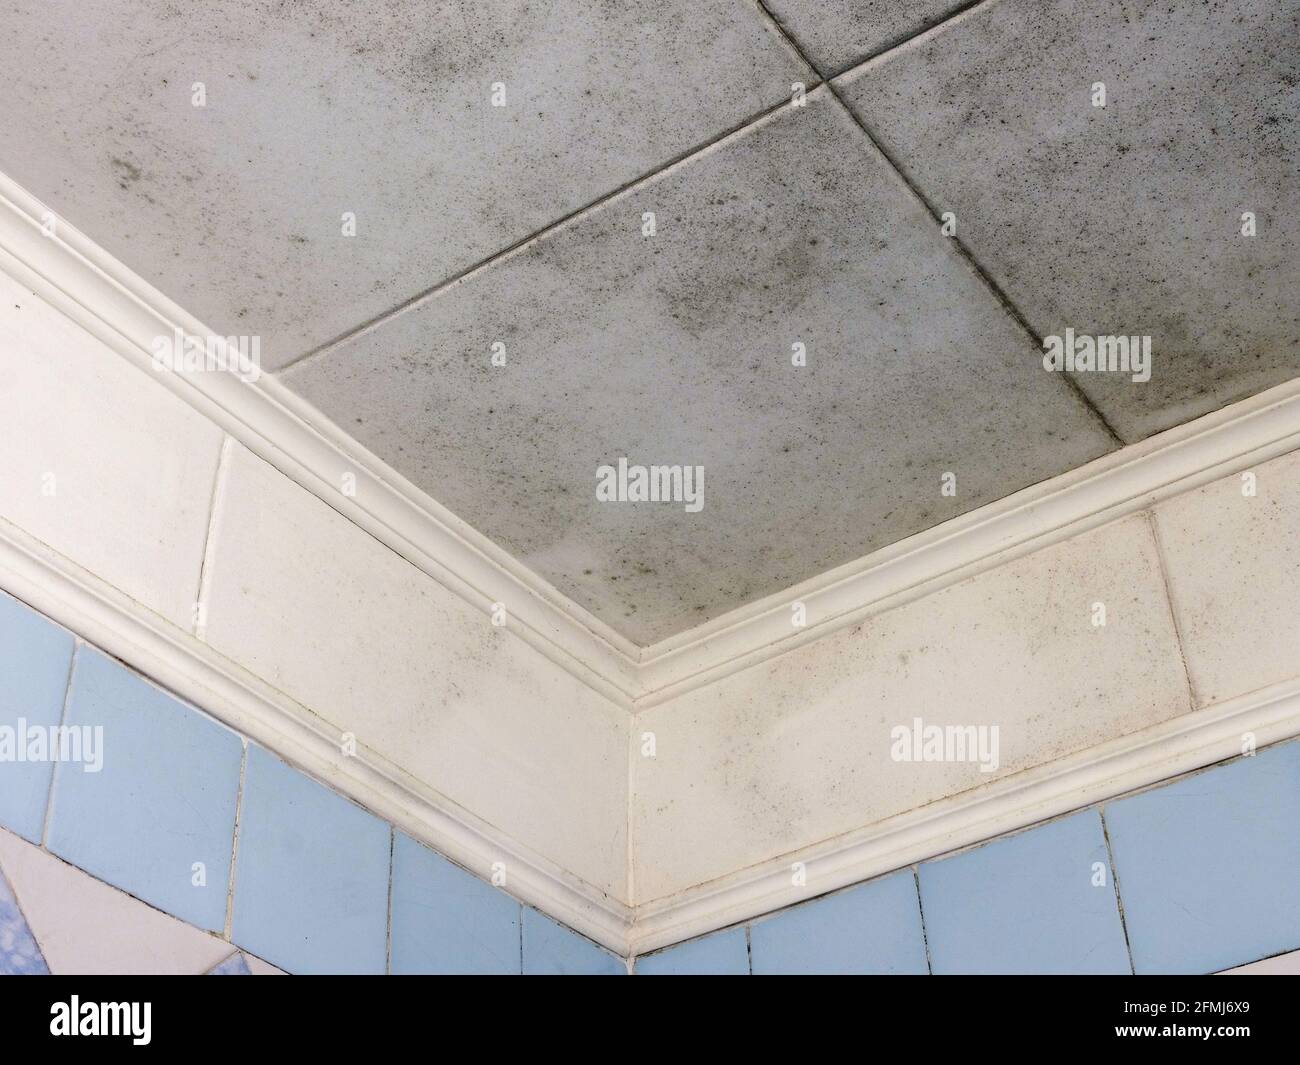 Bathroom ceiling covered with black mold. House inspection. Stock Photo